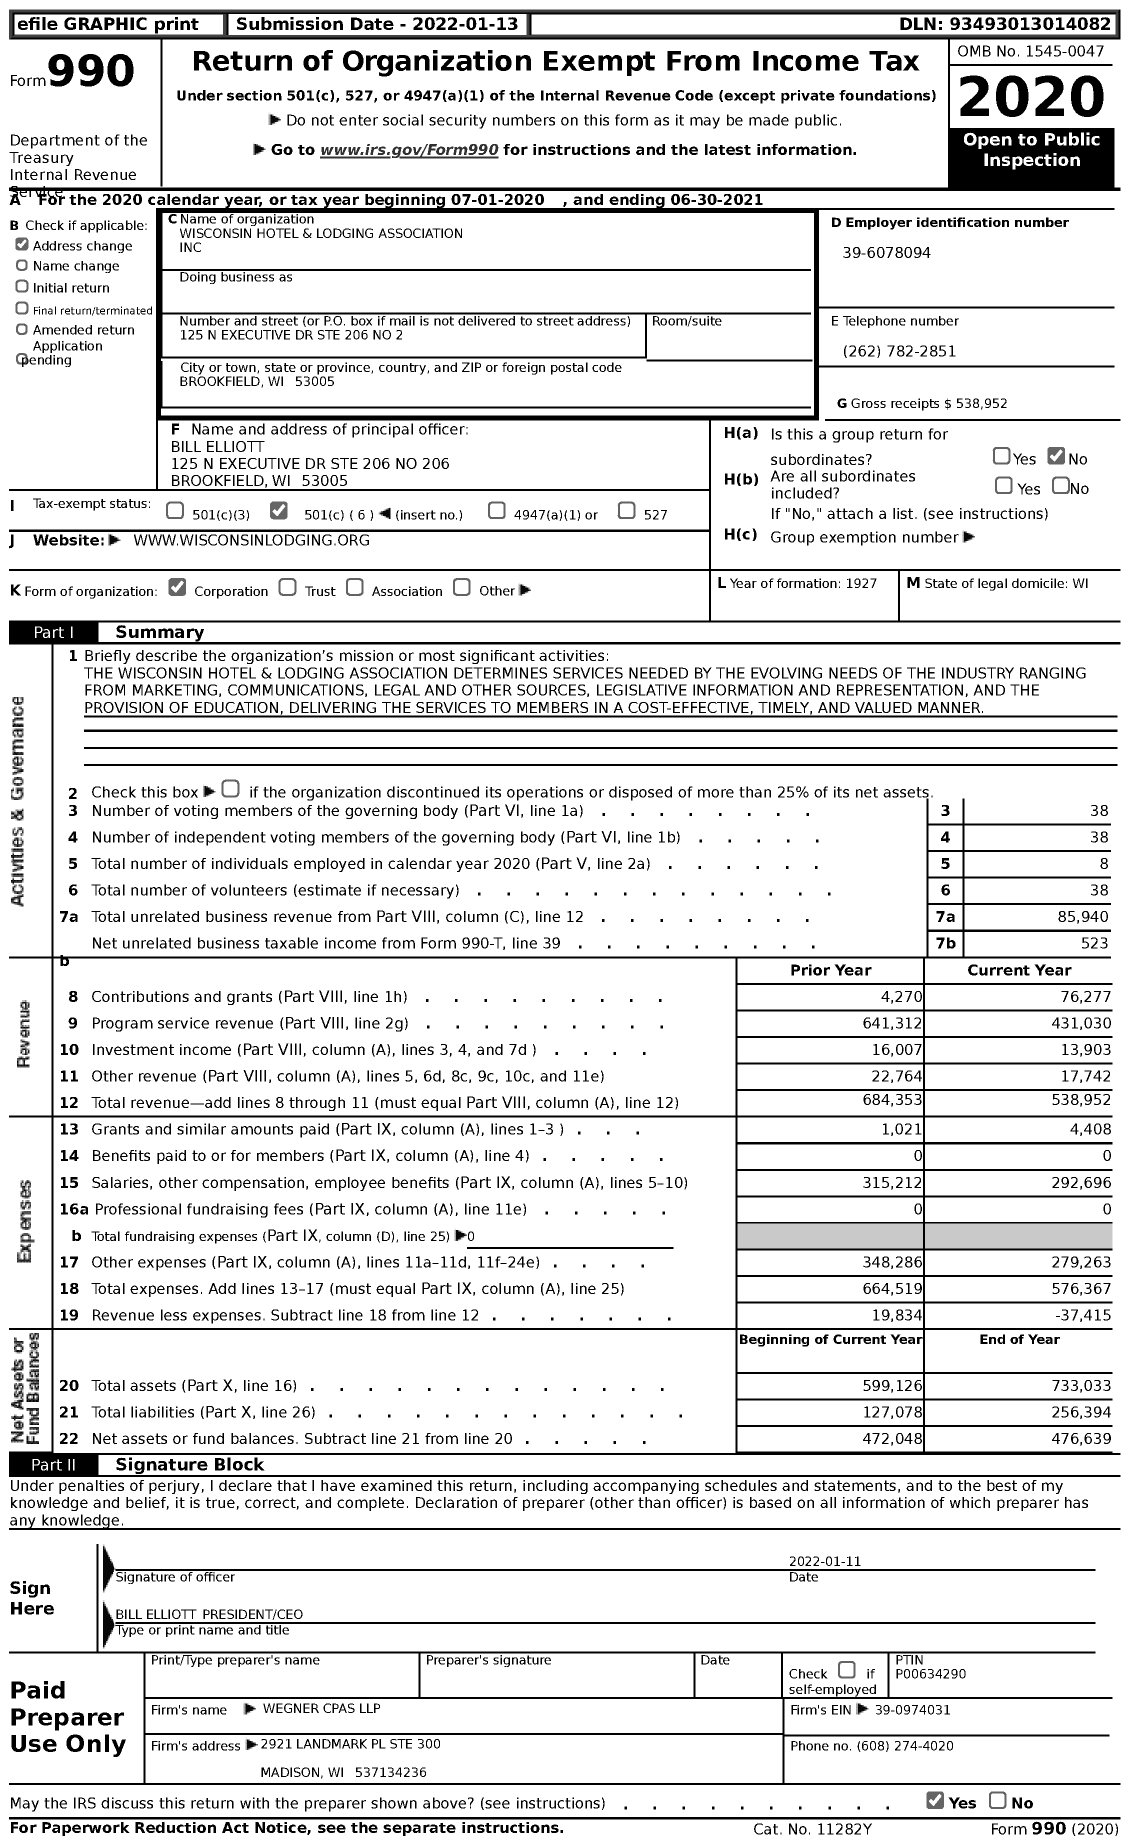 Image of first page of 2020 Form 990 for Wisconsin Hotel & Lodging Association (WH&LA)